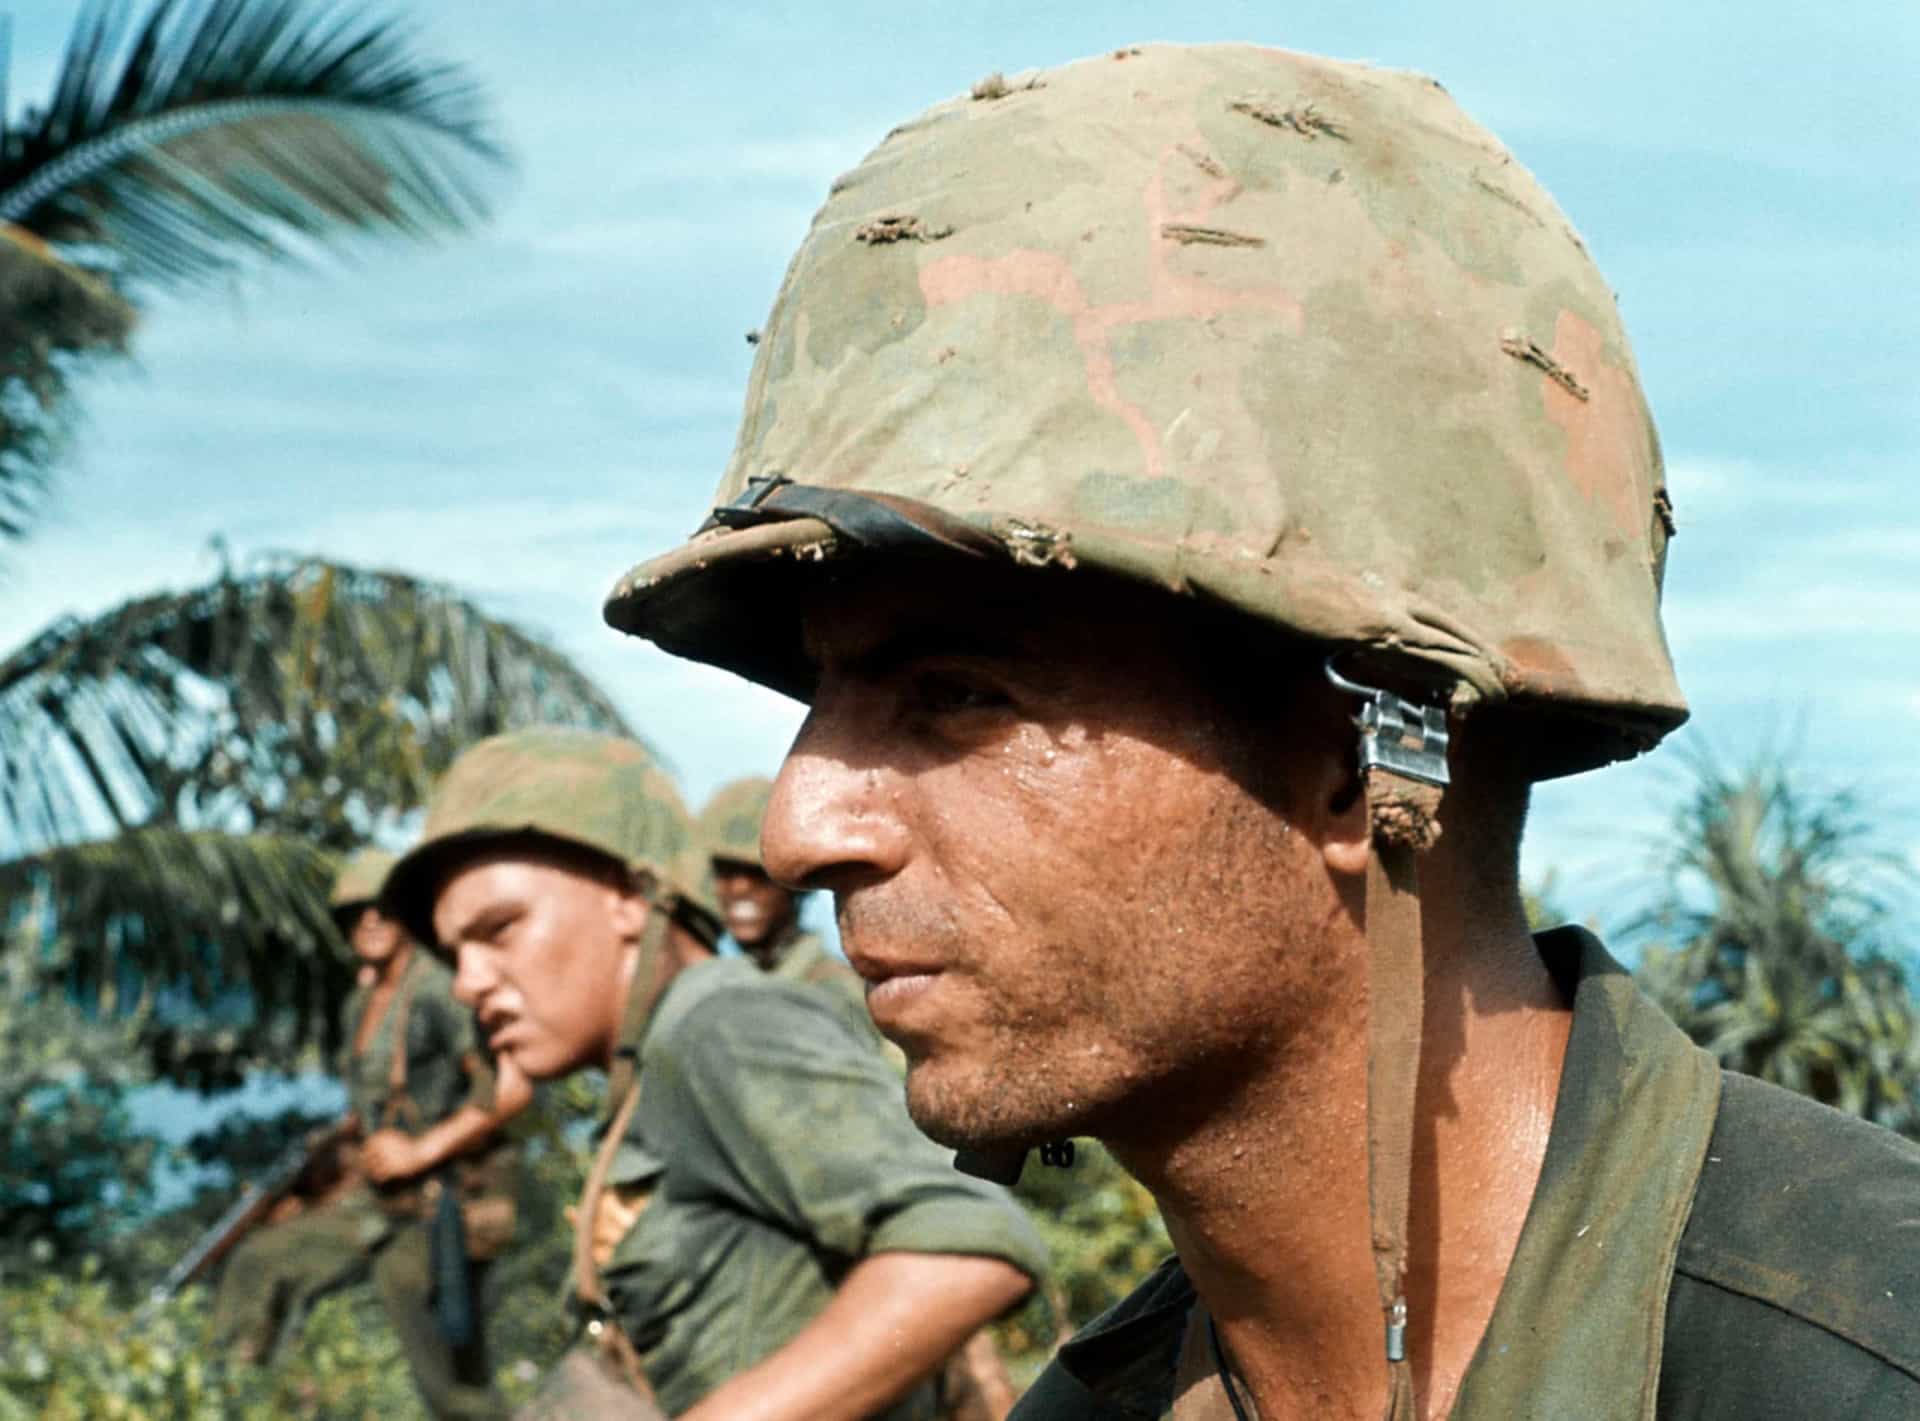 <p>The Vietnam War (1954–75) was a long, costly, and divisive conflict that pitted the communist government of North Vietnam against South Vietnam and its principal ally, the United States. It was the deadliest proxy war of the Cold War era, and claimed the lives of over 3.5 million people.</p>